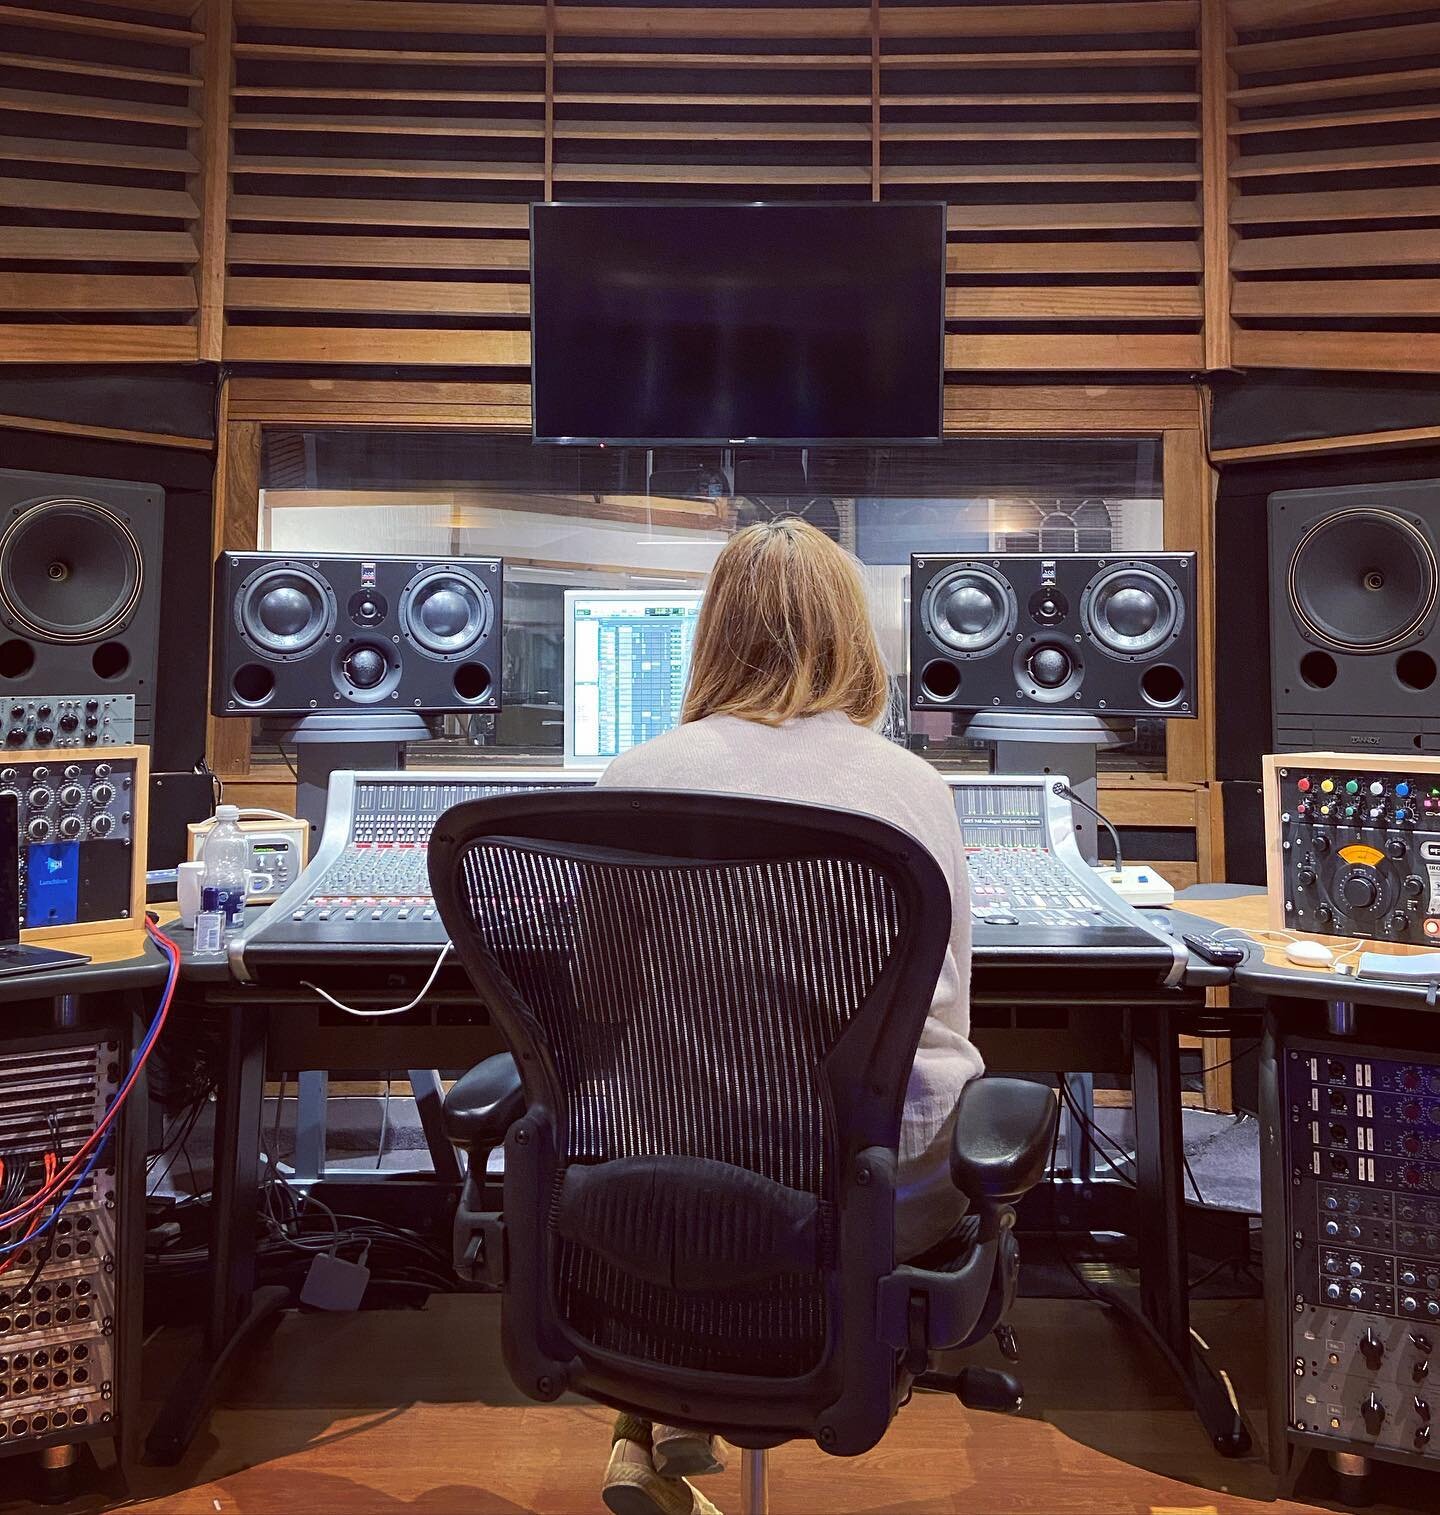 Mix review time with the brilliant @deetiebelle ✨
We&rsquo;ve had such a lovely week messing with sounds, sculpting and mixing. 
Making this album has been a slightly longer journey than expected (thanks Covid) - but something really beautiful has em